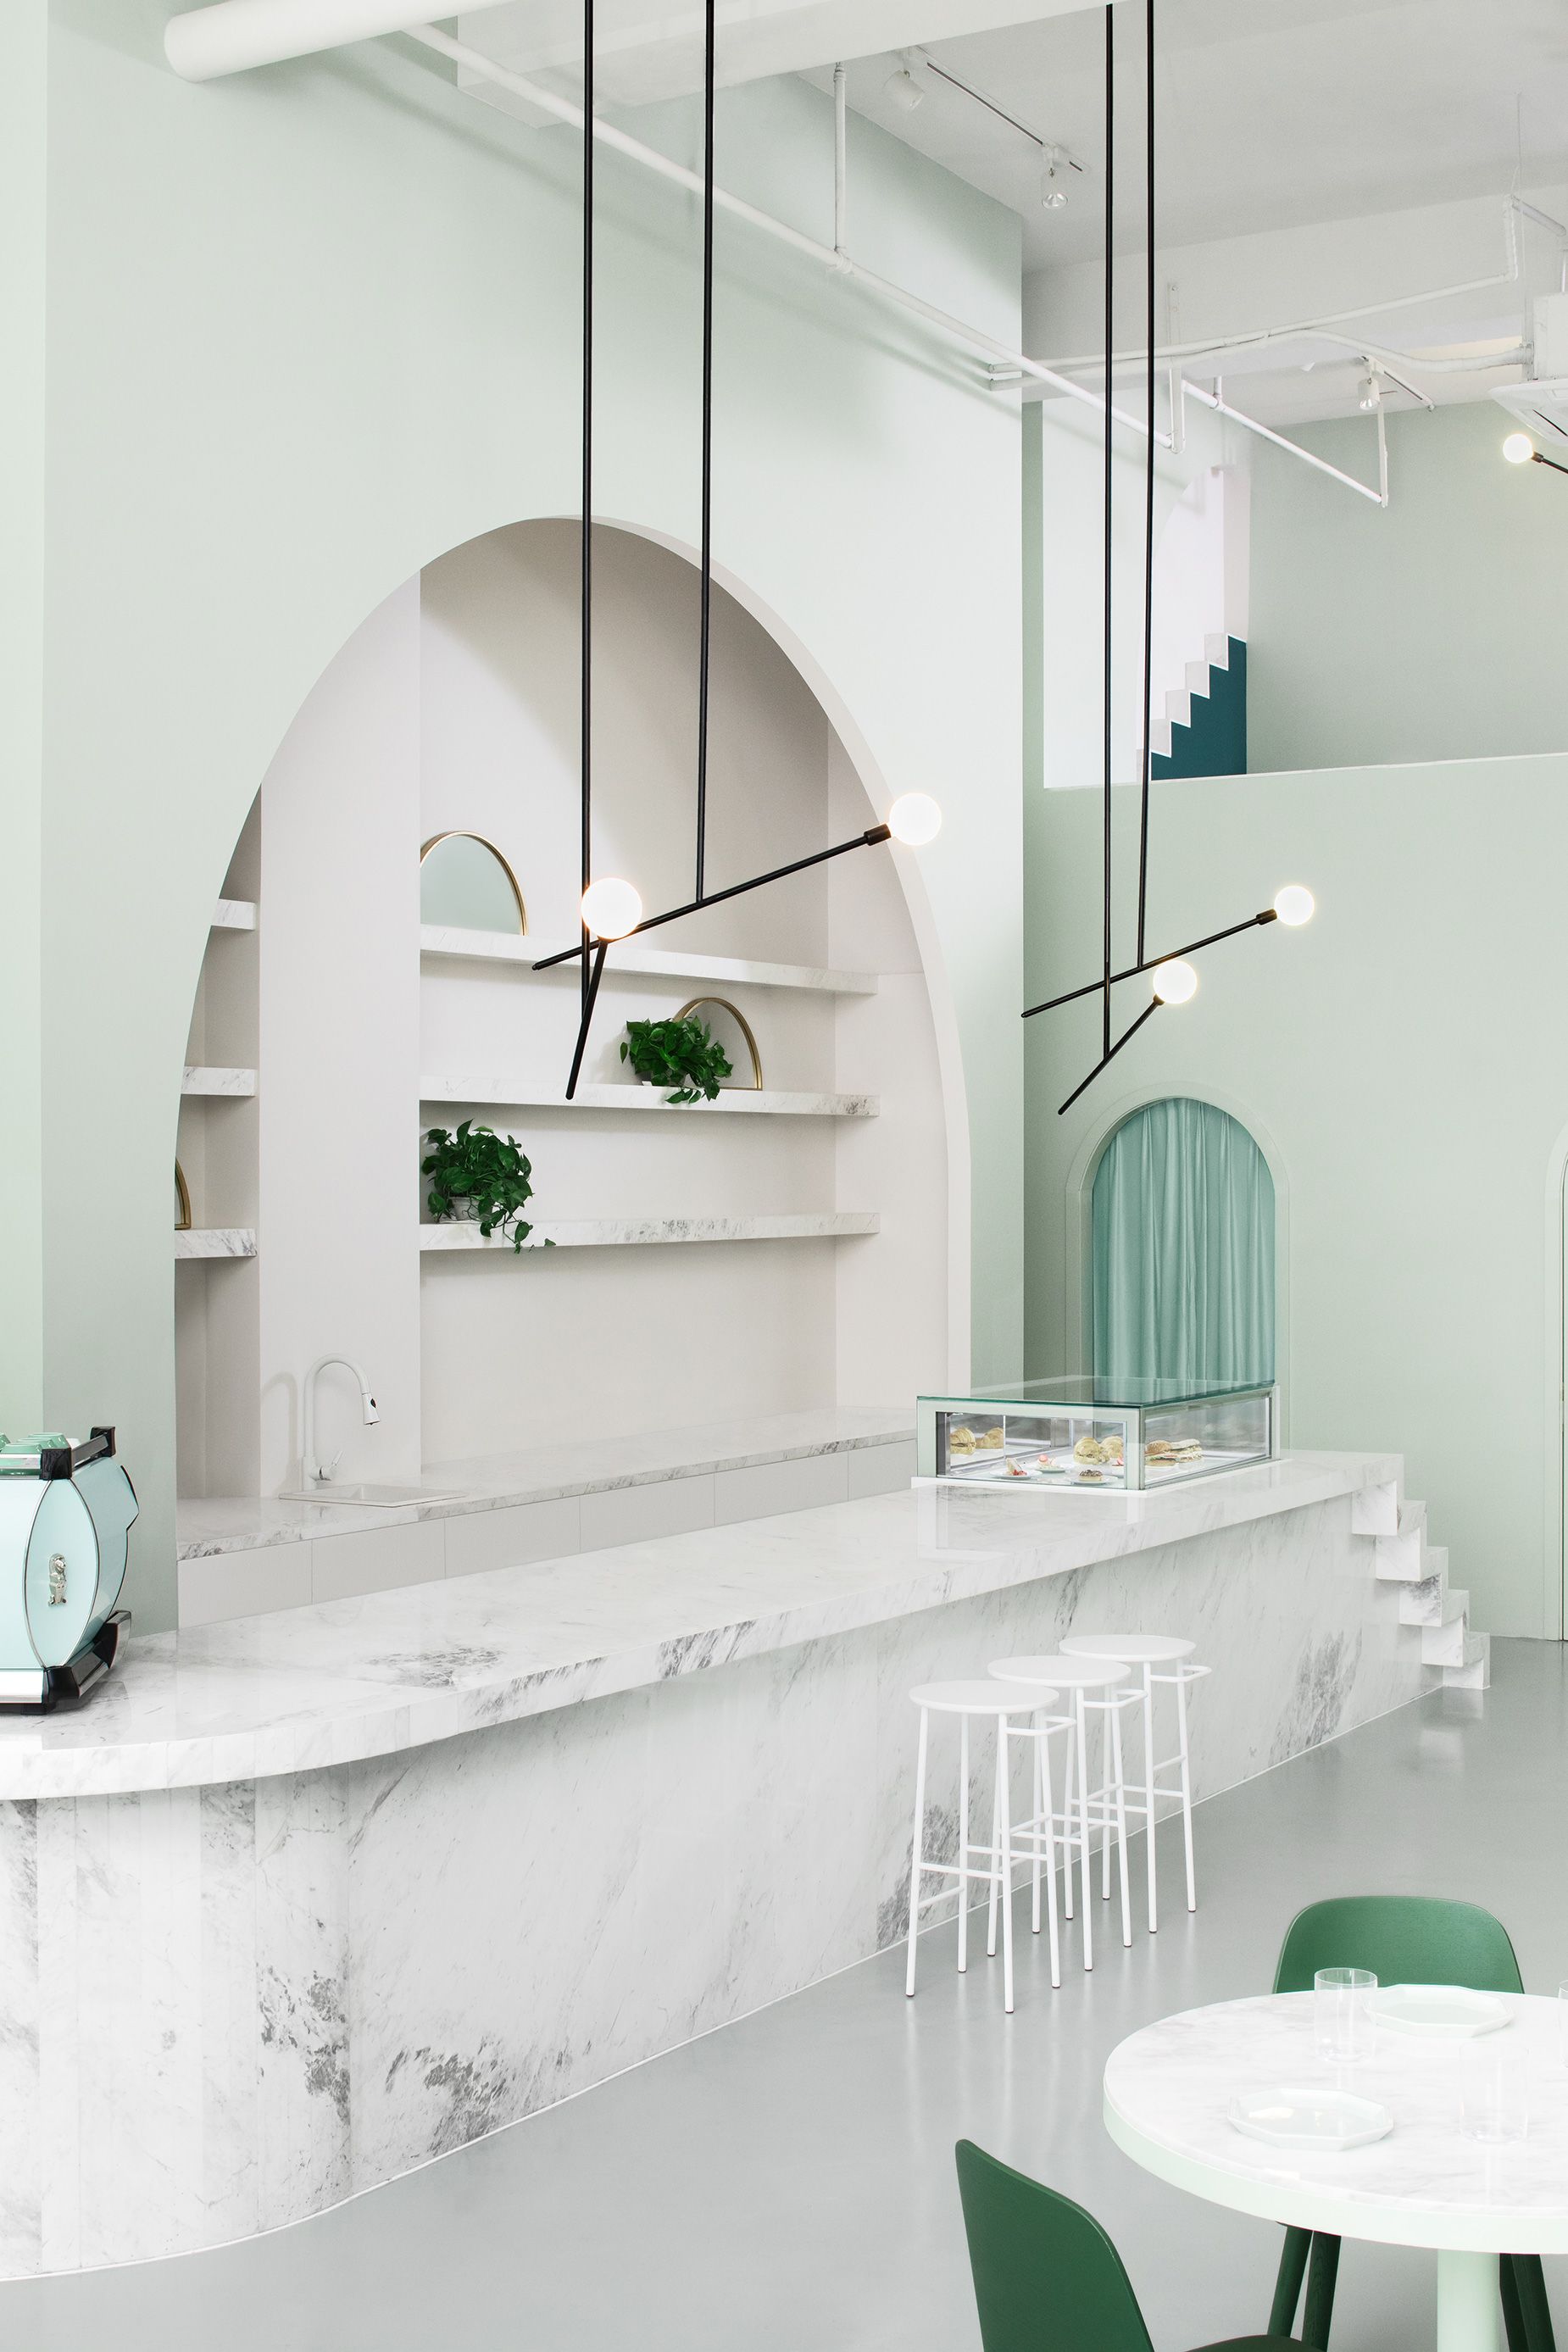 With its languid architectural lines and calming pastels, the Budapest Cafe encourages customers "to explore and physically engage with the space, much like a (film) set."